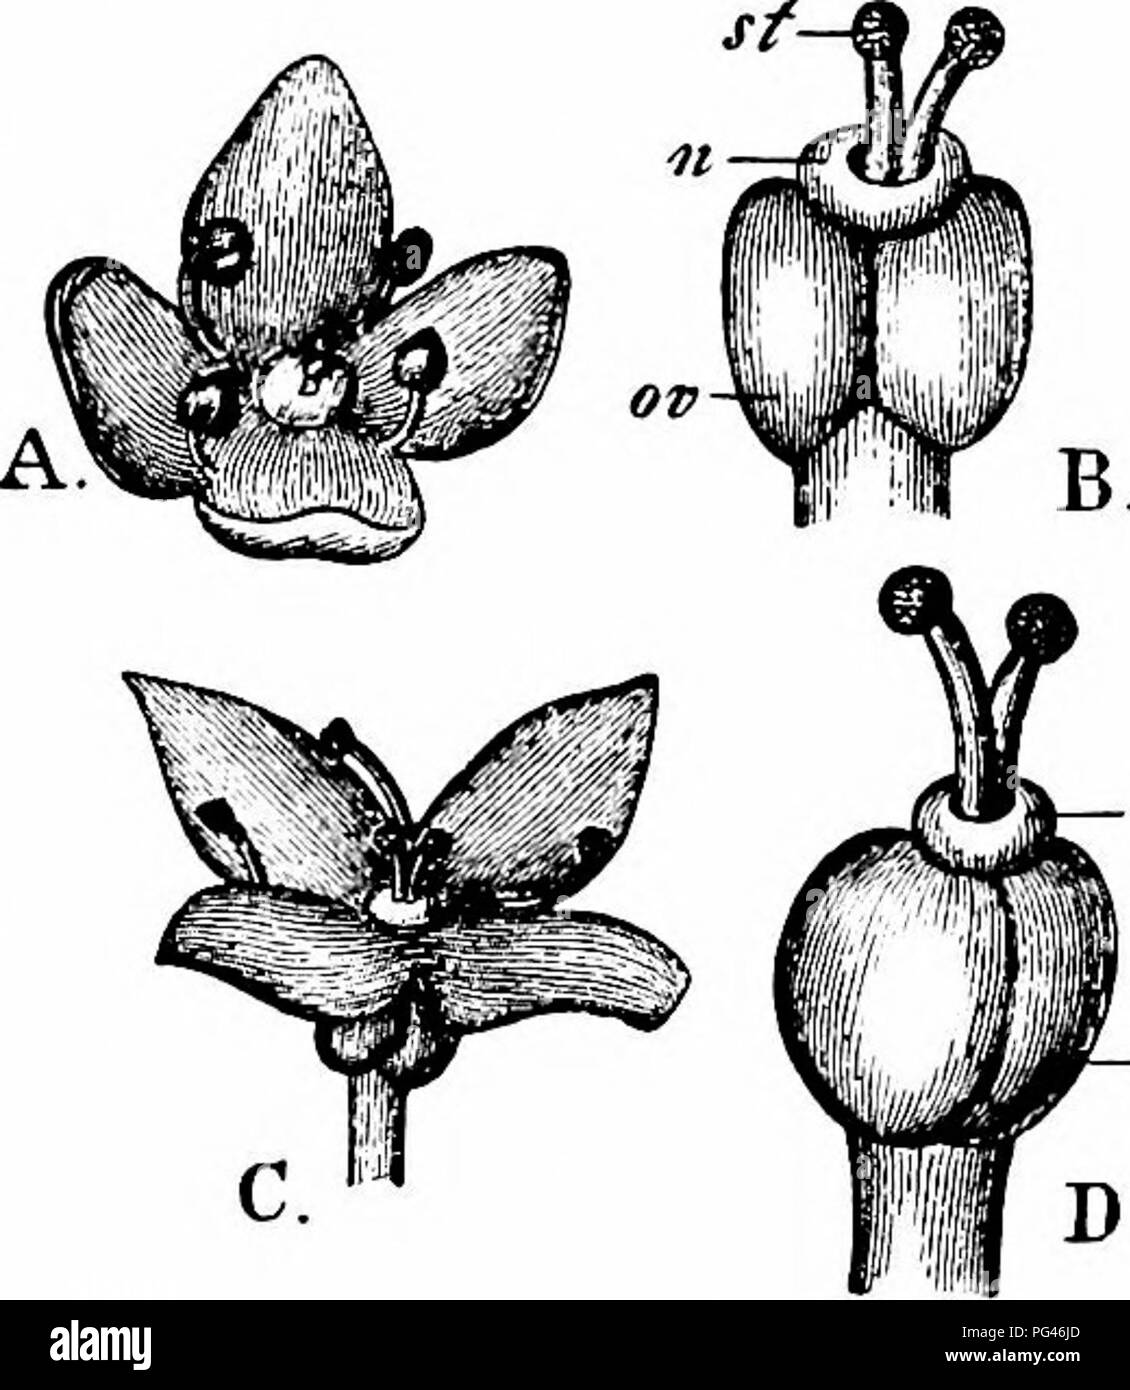 . Handbook of flower pollination : based upon Hermann Mu?ller's work 'The fertilisation of flowers by insects' . Fertilization of plants. 544 ANGIOSPERMAE—DICOTYLEDONES MacLeod (Pyrenees) observed a variety of this species (possibly G. Lapeyrou- sianum) to be visited by a beetle, 3 Muscids, and 3 Syrphids. He describes it as belonging to flovifer class C, while the other species of Galium belong to E. 1247. G. verum L.xG. Mollugo L. ( = G. ochroleucum Wolf.). (Knuth, ' Weit. Beob. u. Bl. u. Insekt. a. d. nordfr. Ins.,' p. 235.)—In the island of Sylt (2. 7. '93) I have seen numerous insects vis Stock Photo